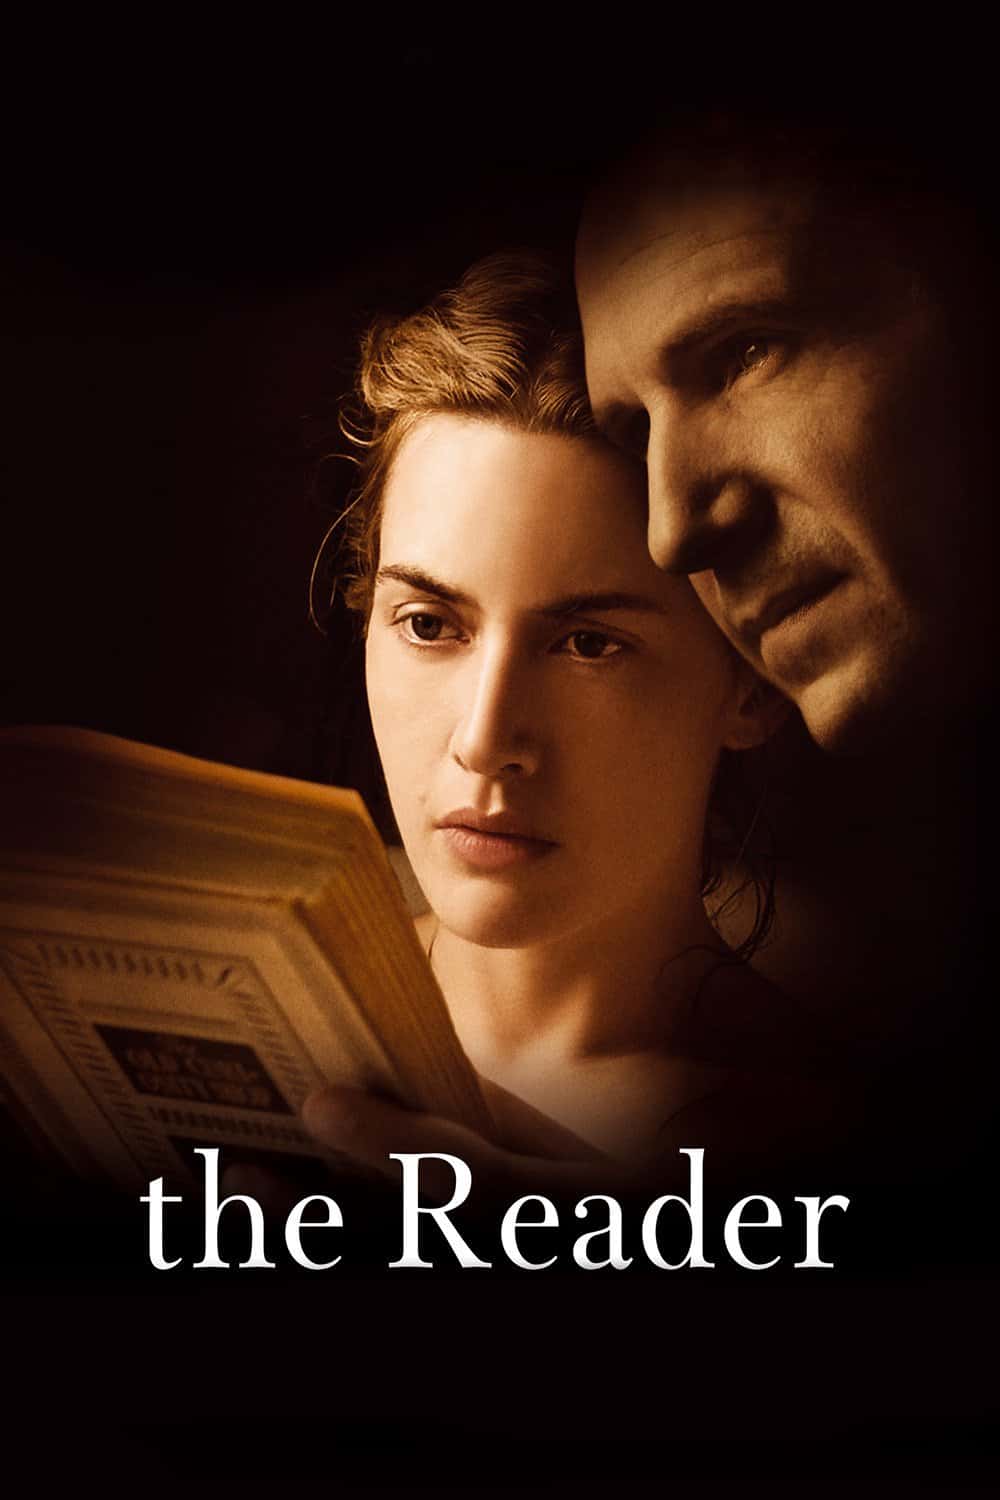 The Reader, 2008 